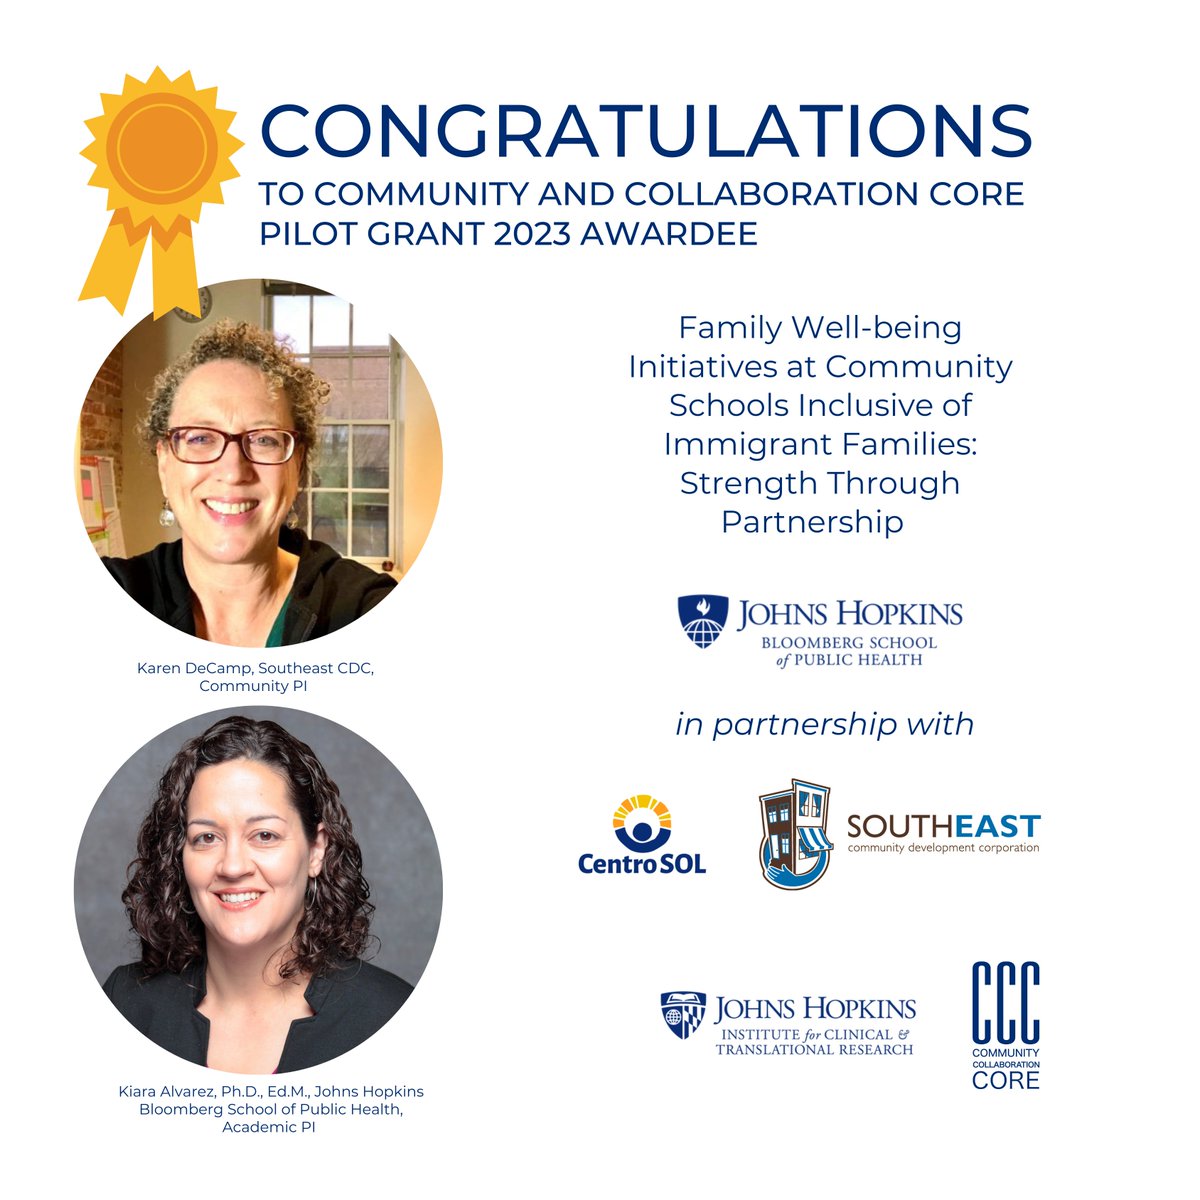 Many congratulations to @moni_gv , @SECDC ,  @kalvarezphd, @KarenDeCamp,  @jhcentrosol, and other members of the Family Well-being Initiatives at Community Schools Inclusive of Immigrant Families: Strength Through Partnership team on the receipt of the CCC CEnR Pilot Grant!